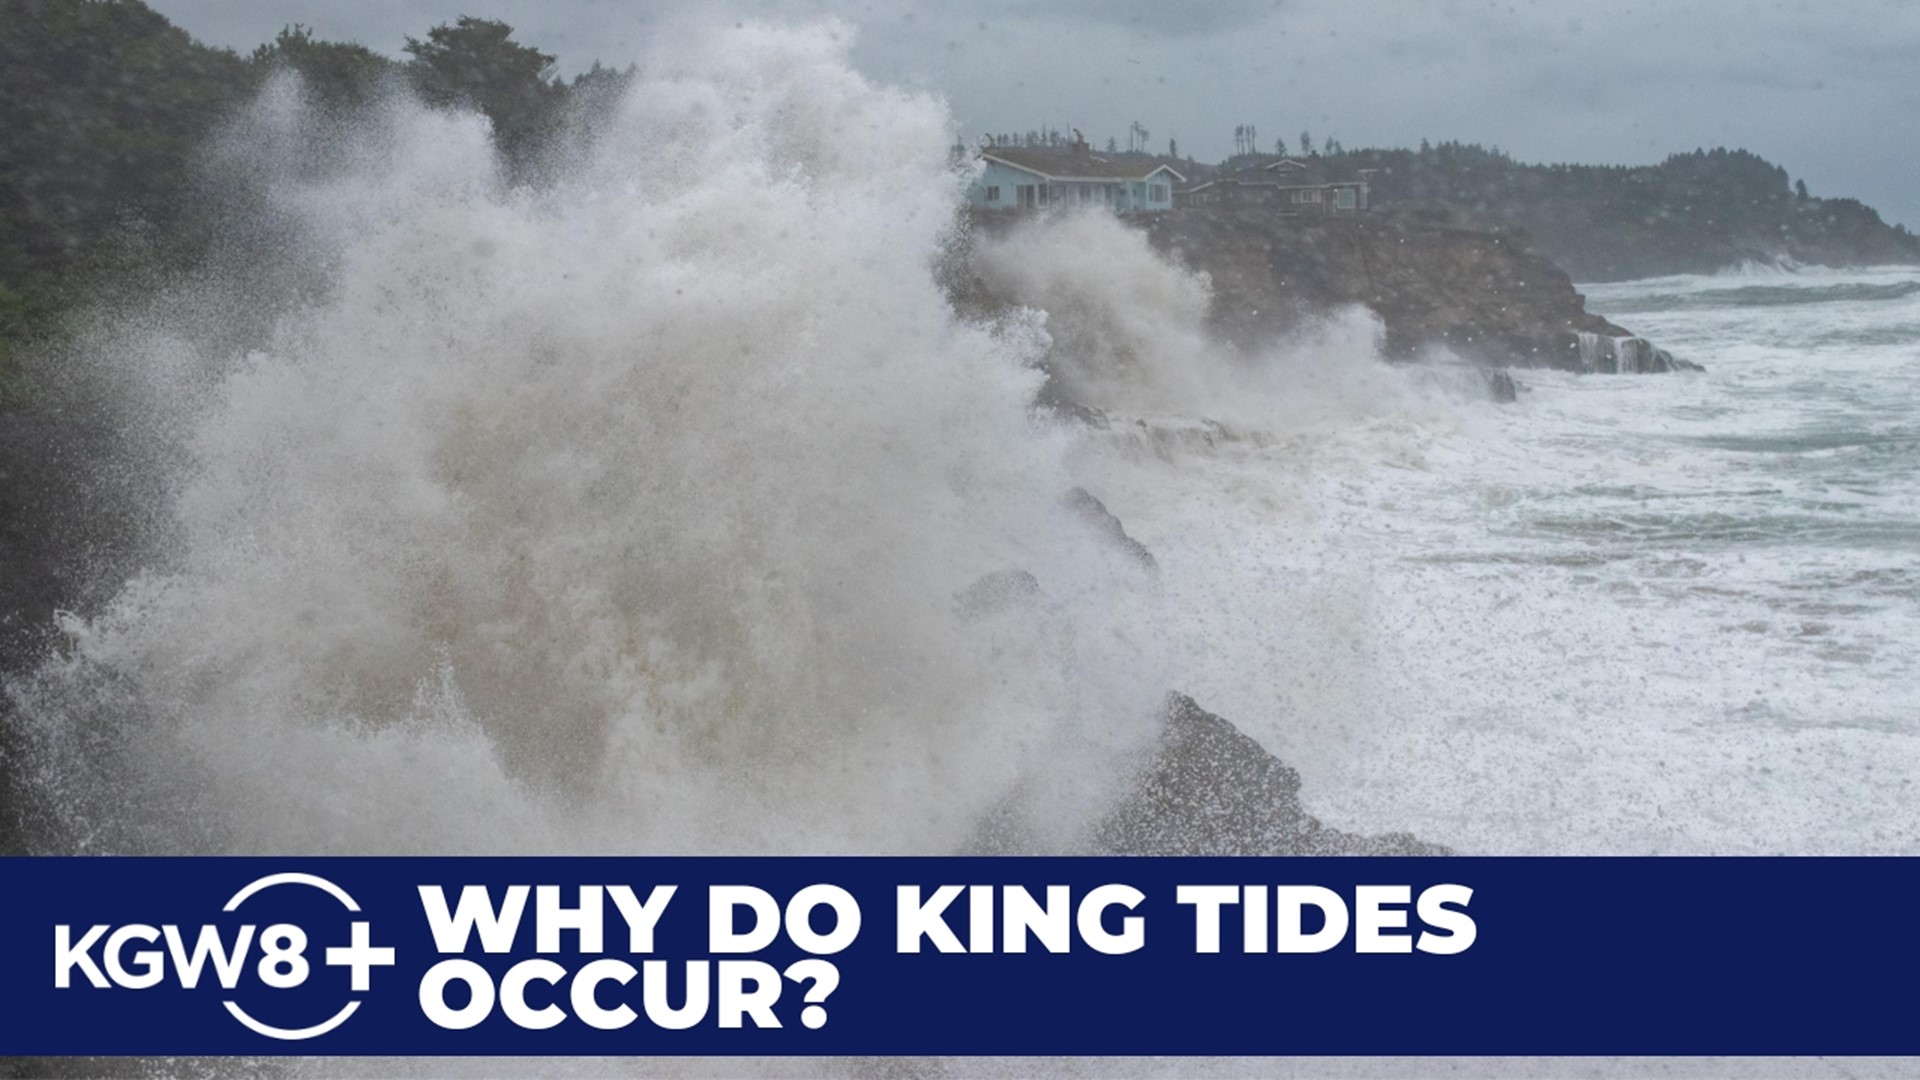 KGW chief meteorologist Matt Zaffino explains the science behind King Tides.